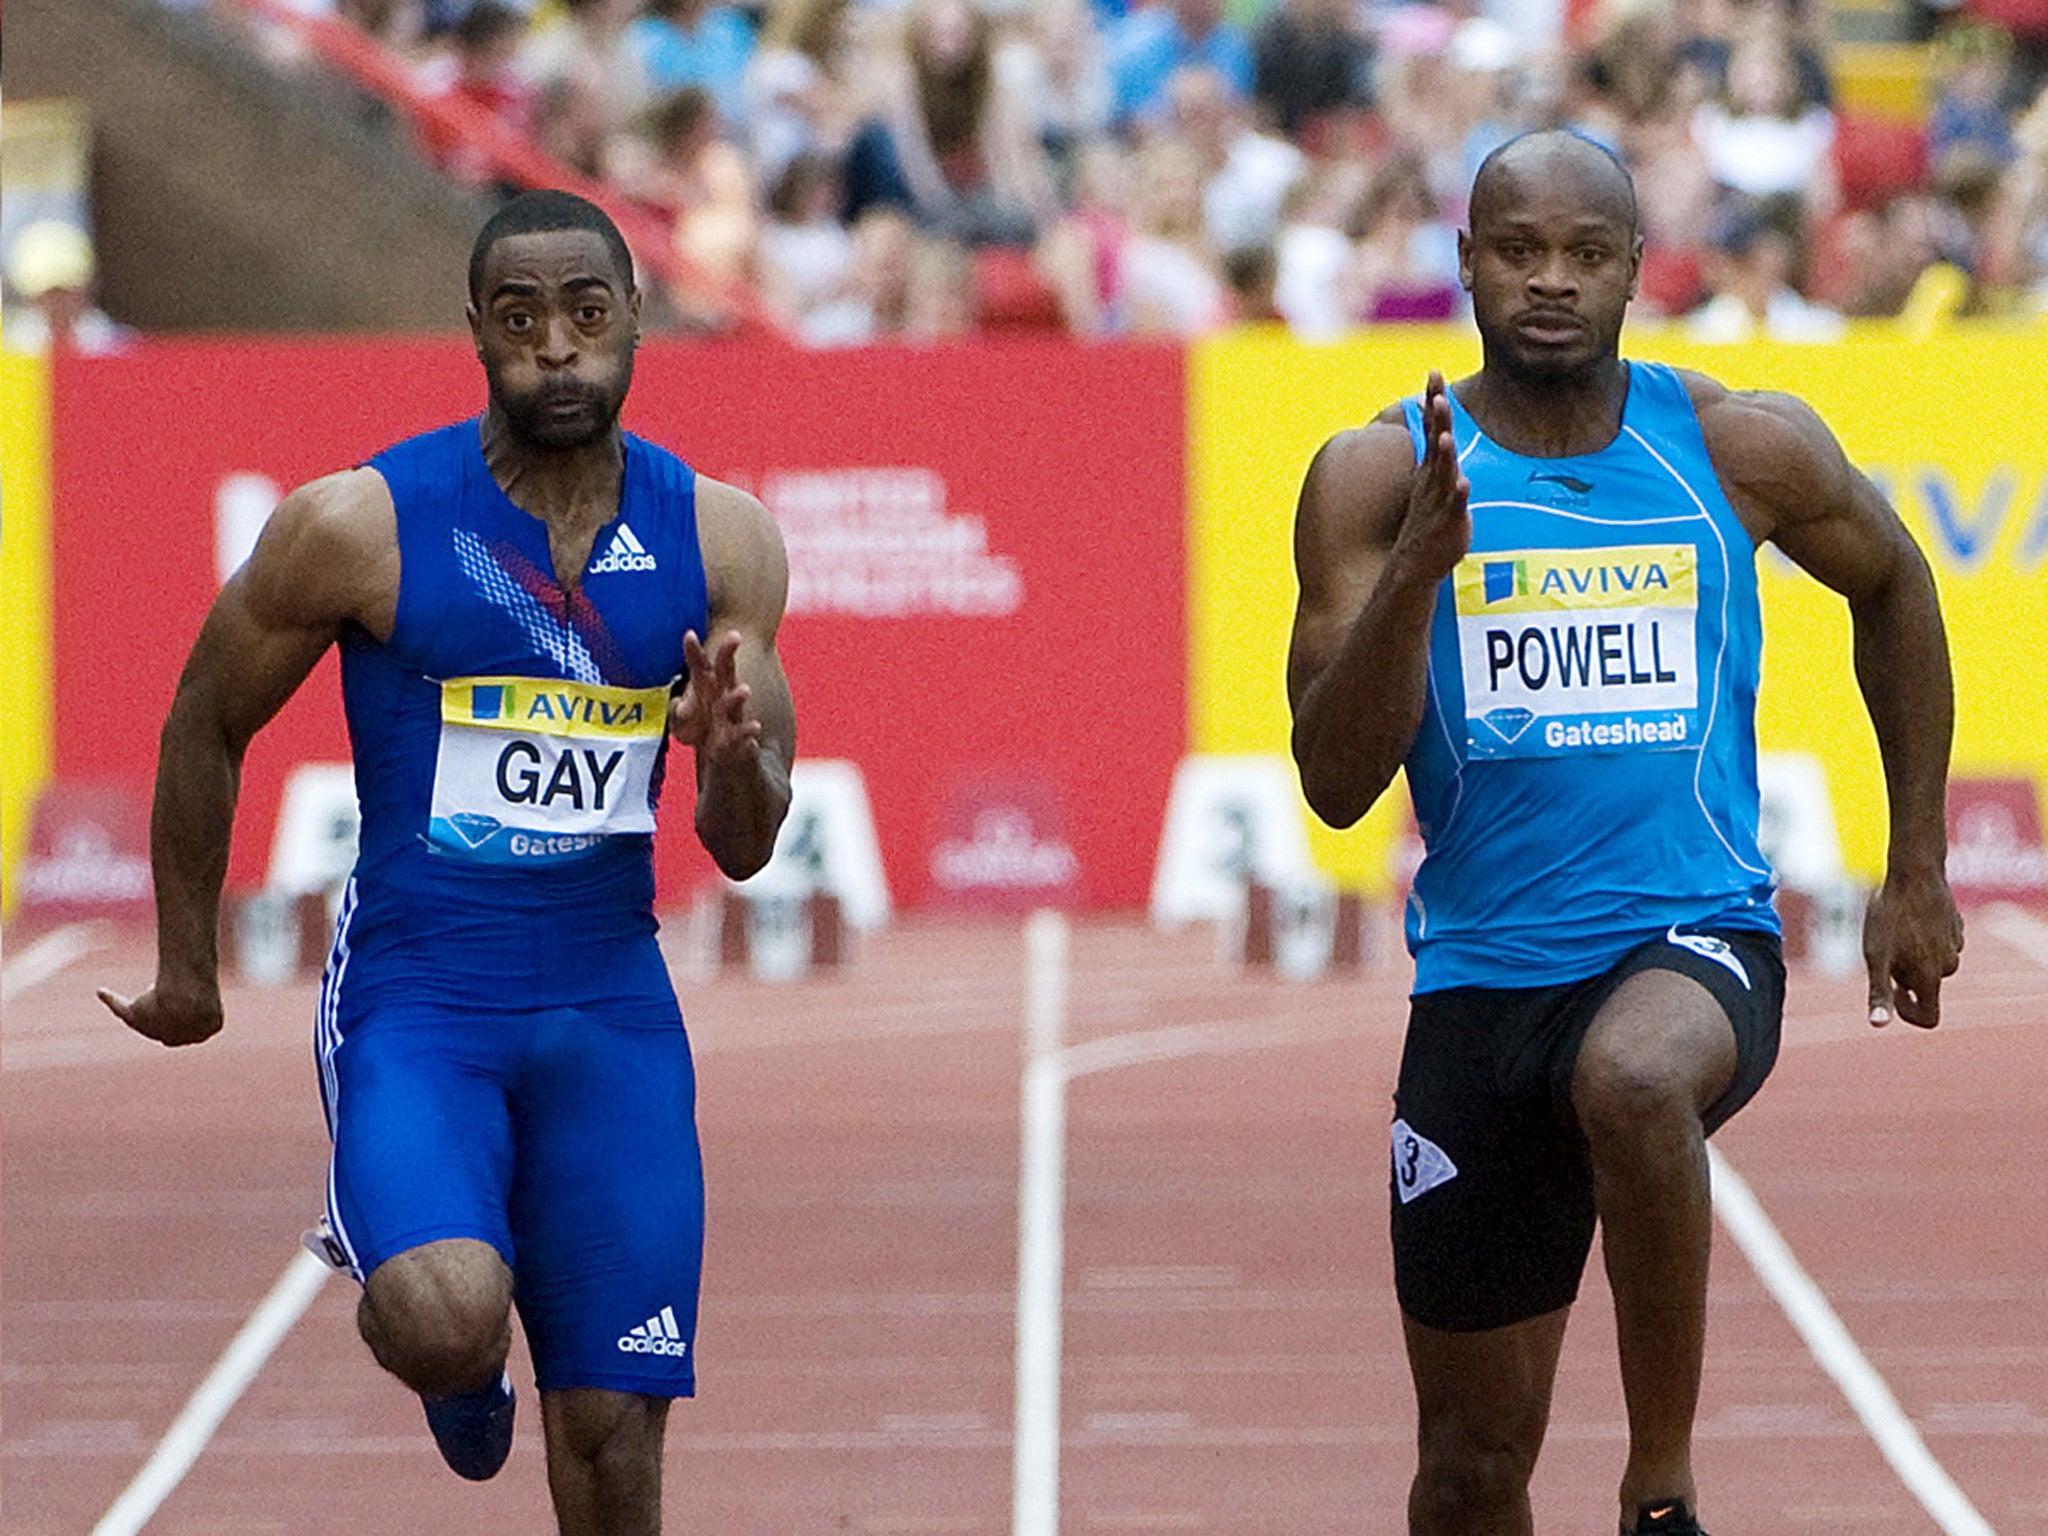 Tyson Gay (left) and Asafa Powell may well have unwittingly taken contaminated products